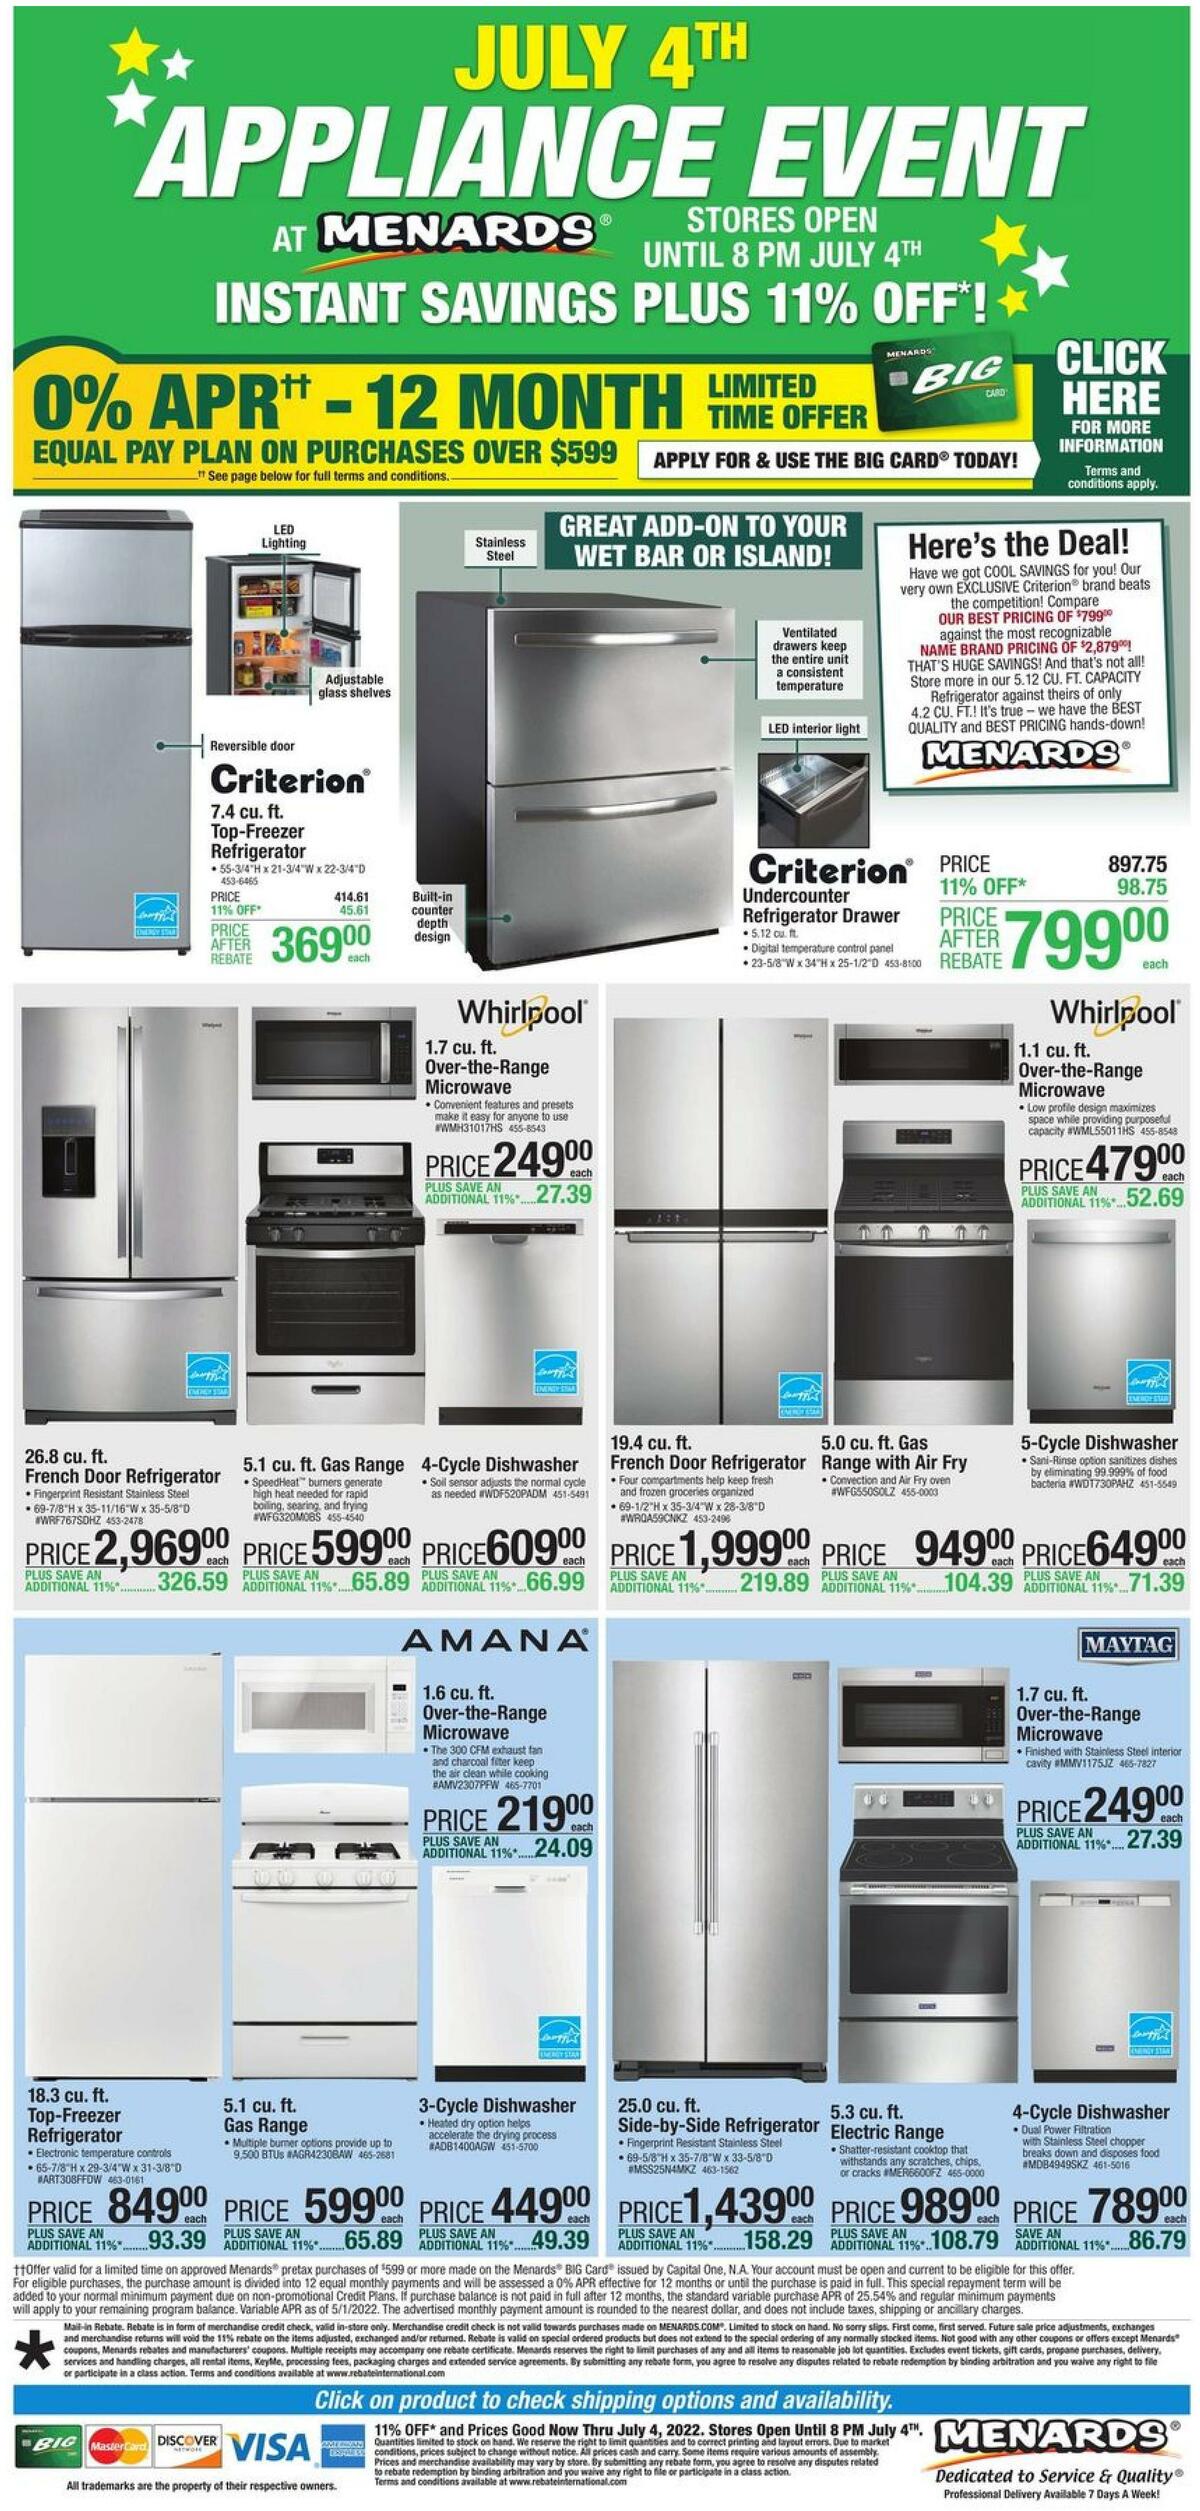 Menards 4TH OF JULY APPLIANCE EVENT Weekly Ad from June 22